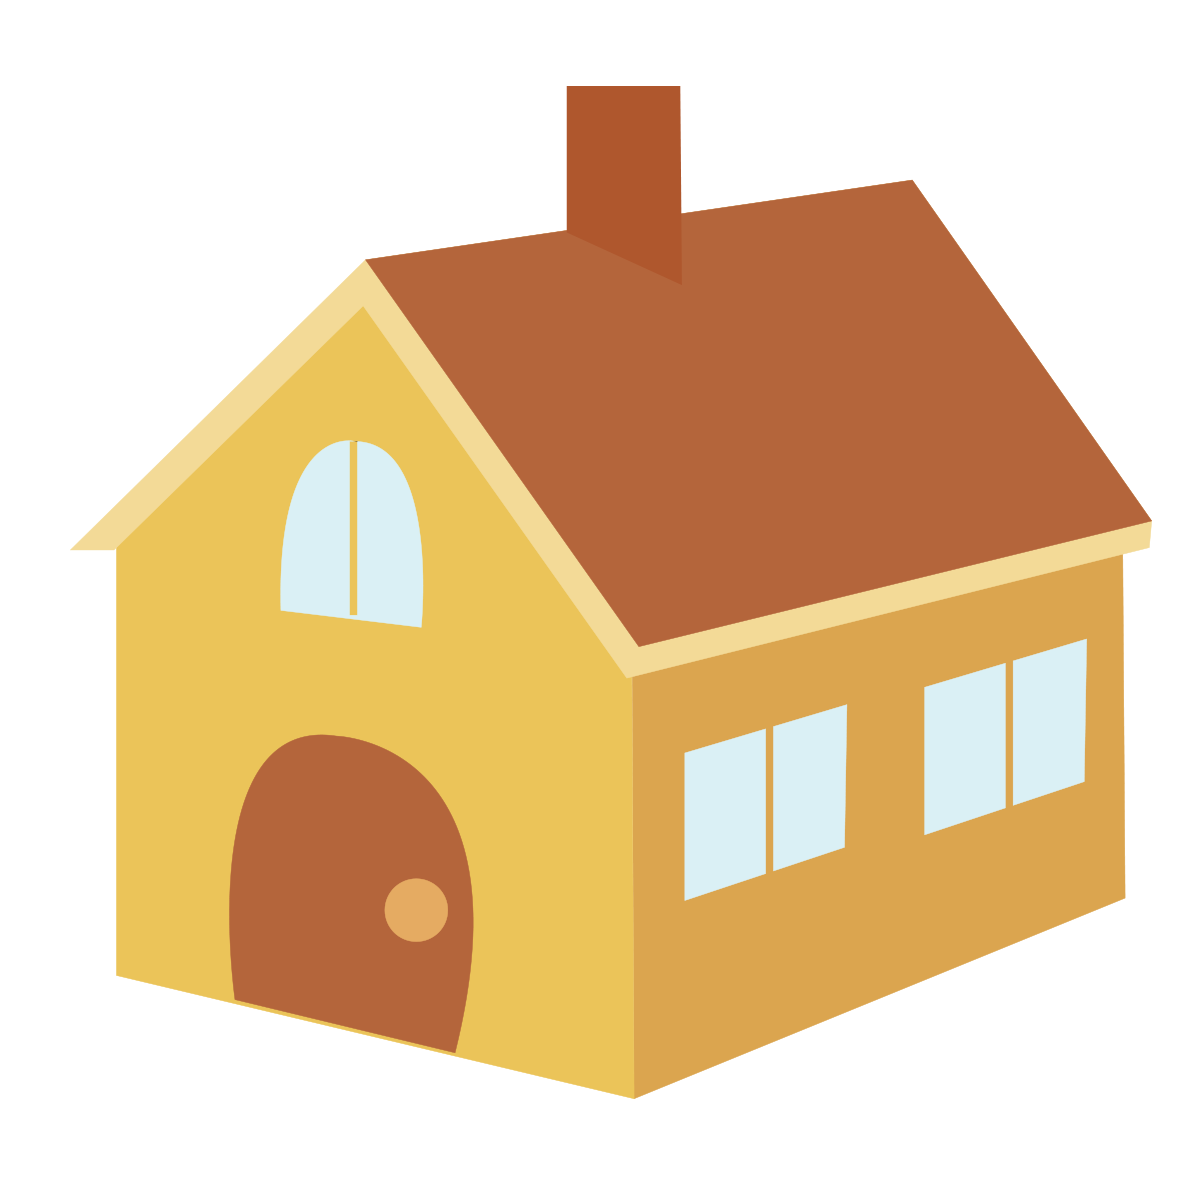 House Drawing Cartoon - Cartoon house model png download - 1181*1181